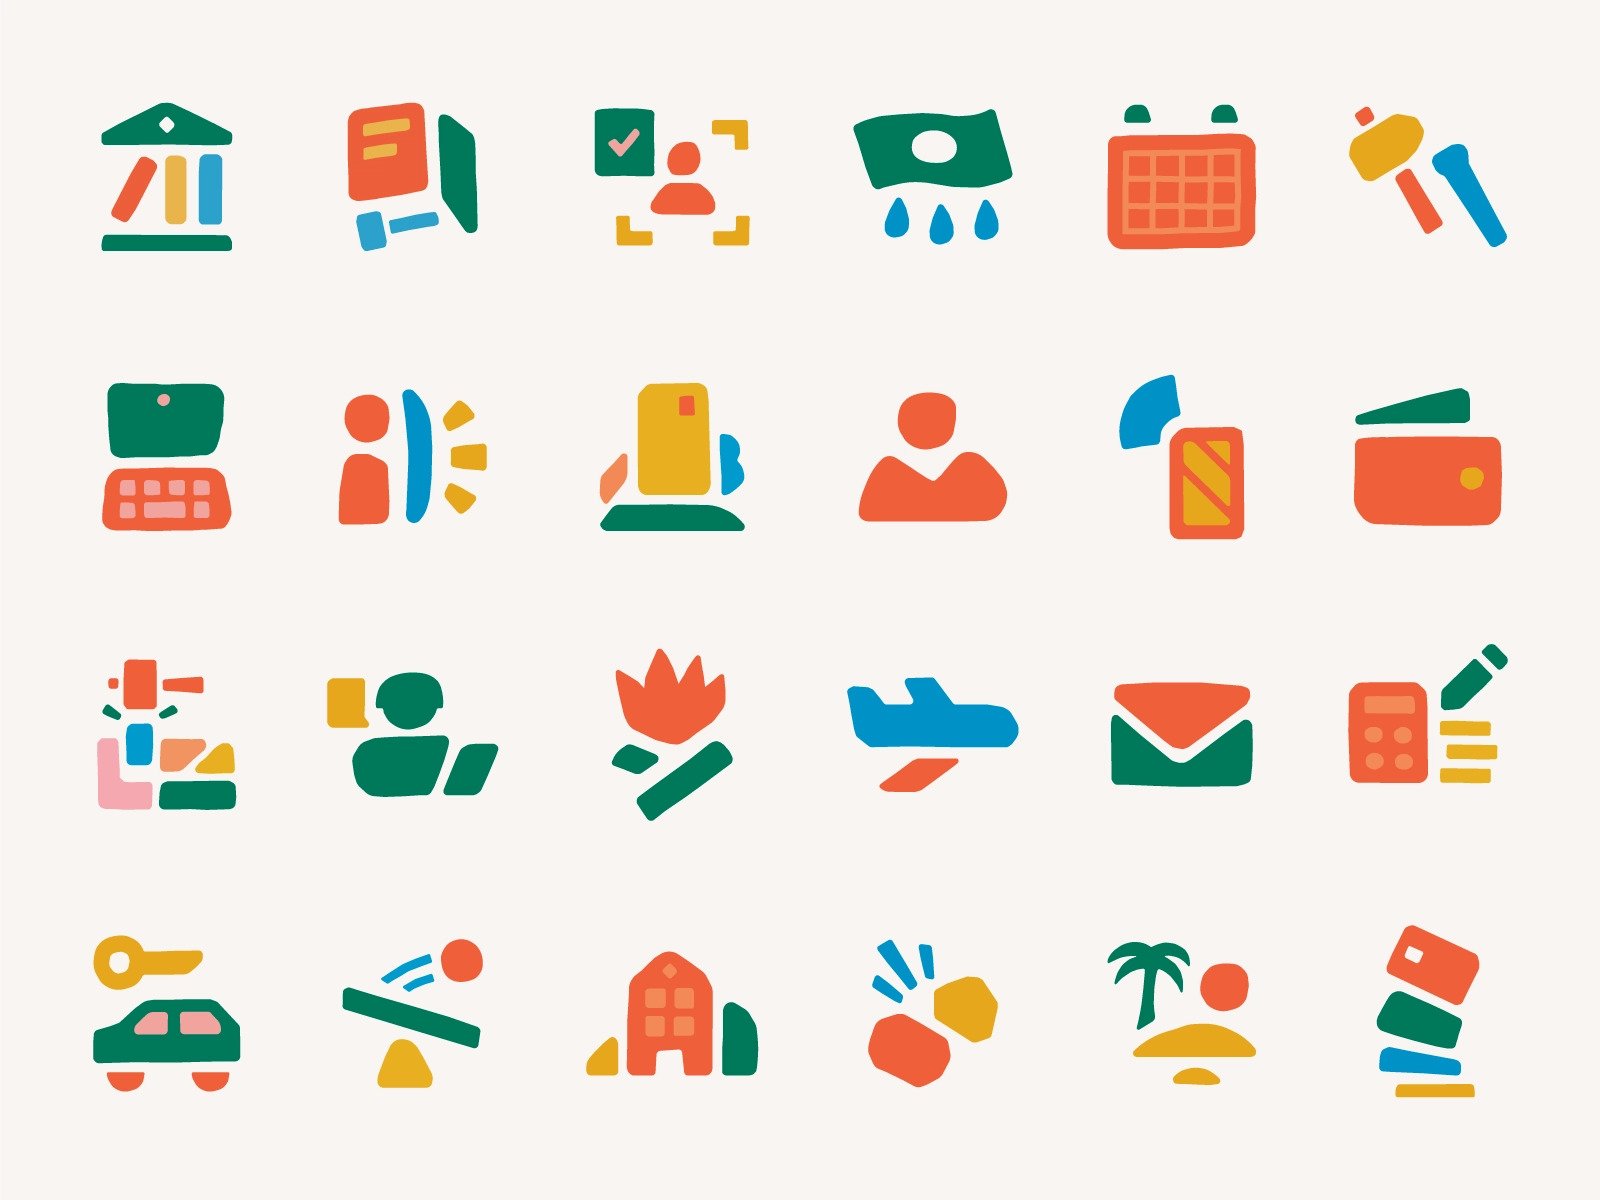 Designing app icons in a simple style